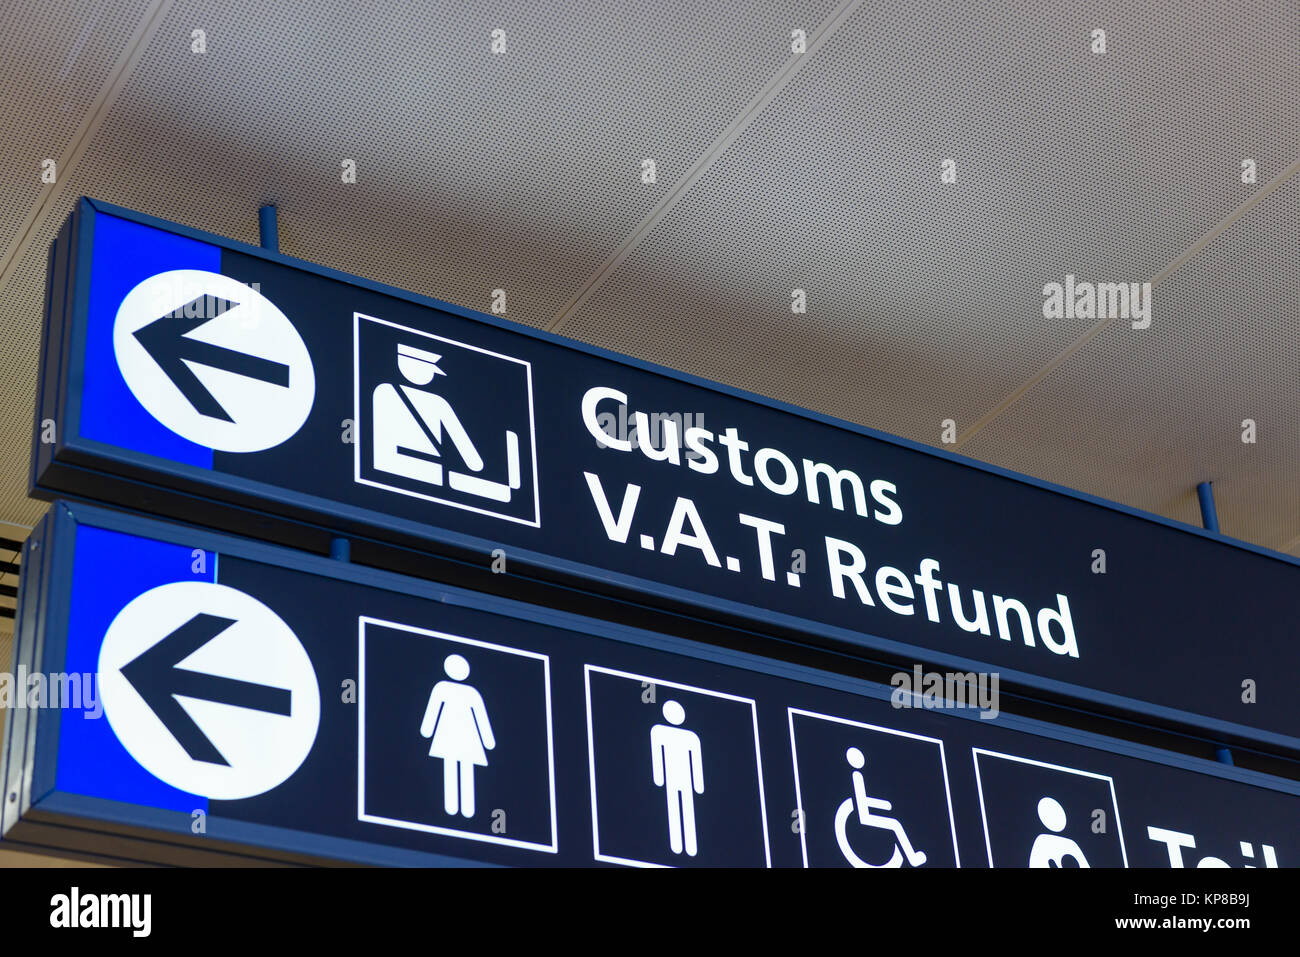 Sign for customs and VAT Refund office in a European Airport. Stock Photo